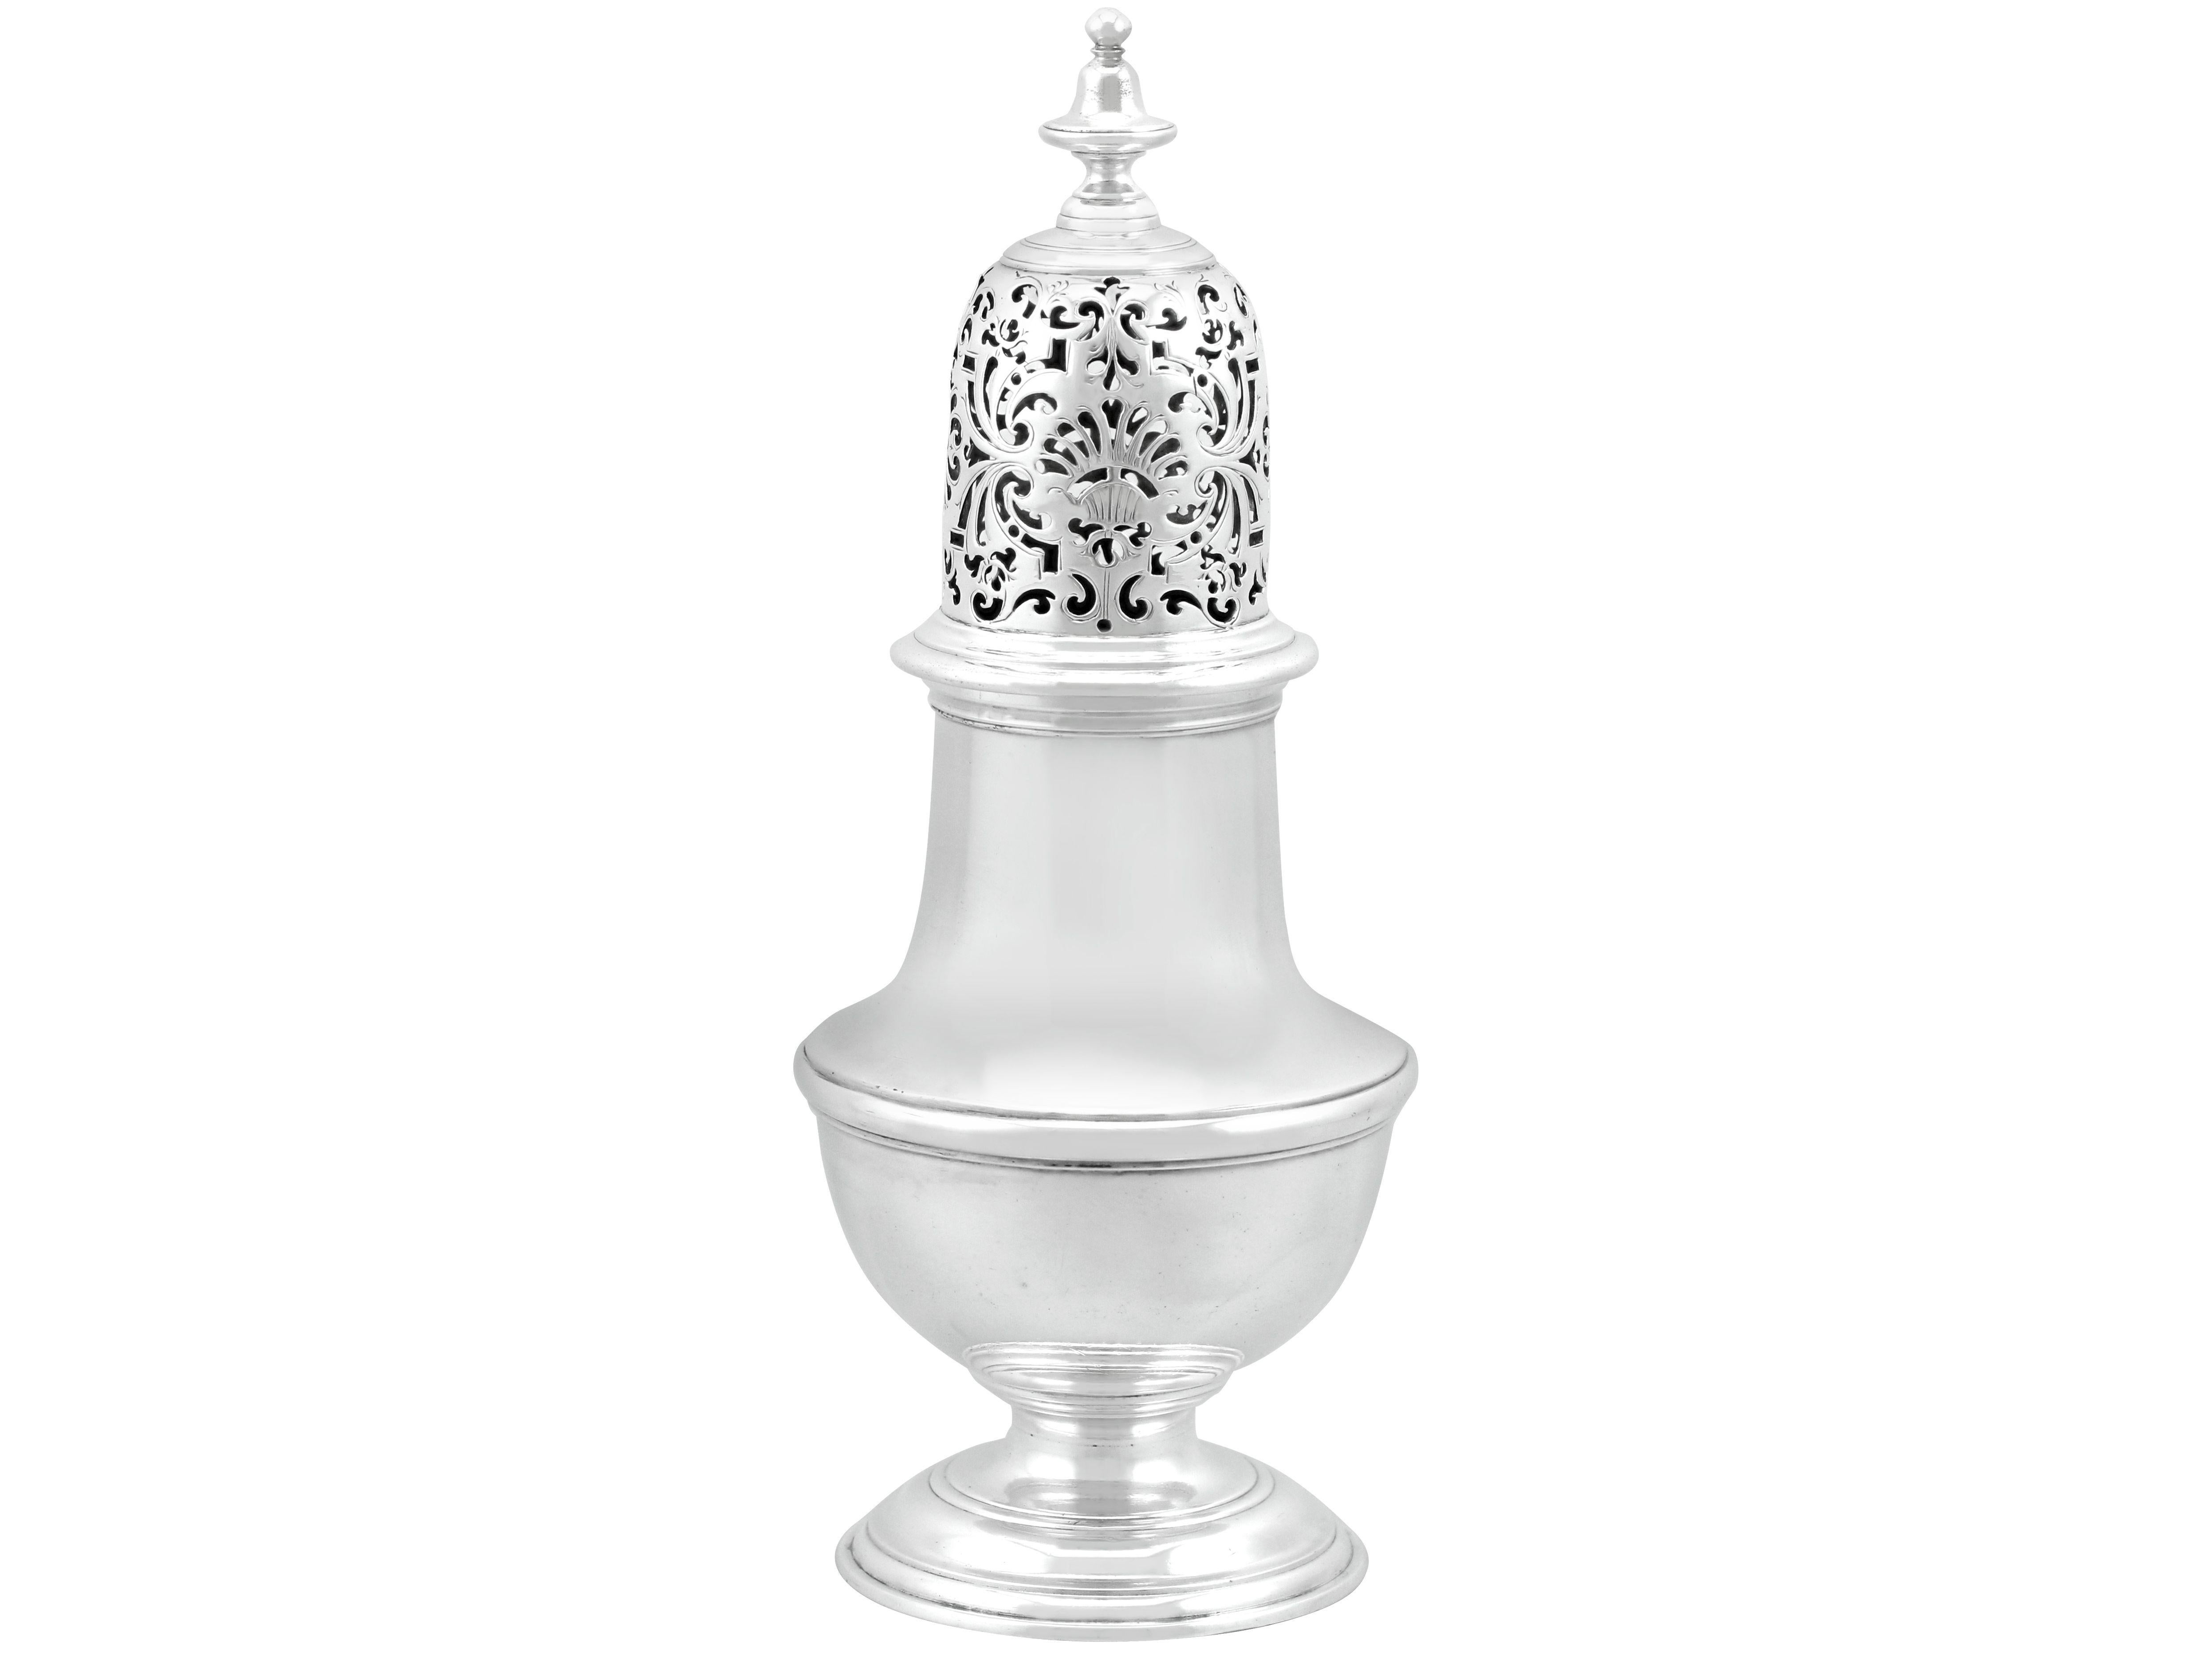 An exceptional, fine and impressive antique Georgian English sterling silver sugar caster by Samuel Wood; an addition to our silver teaware collection

This exceptional and large antique Georgian sterling silver sugar caster has a circular